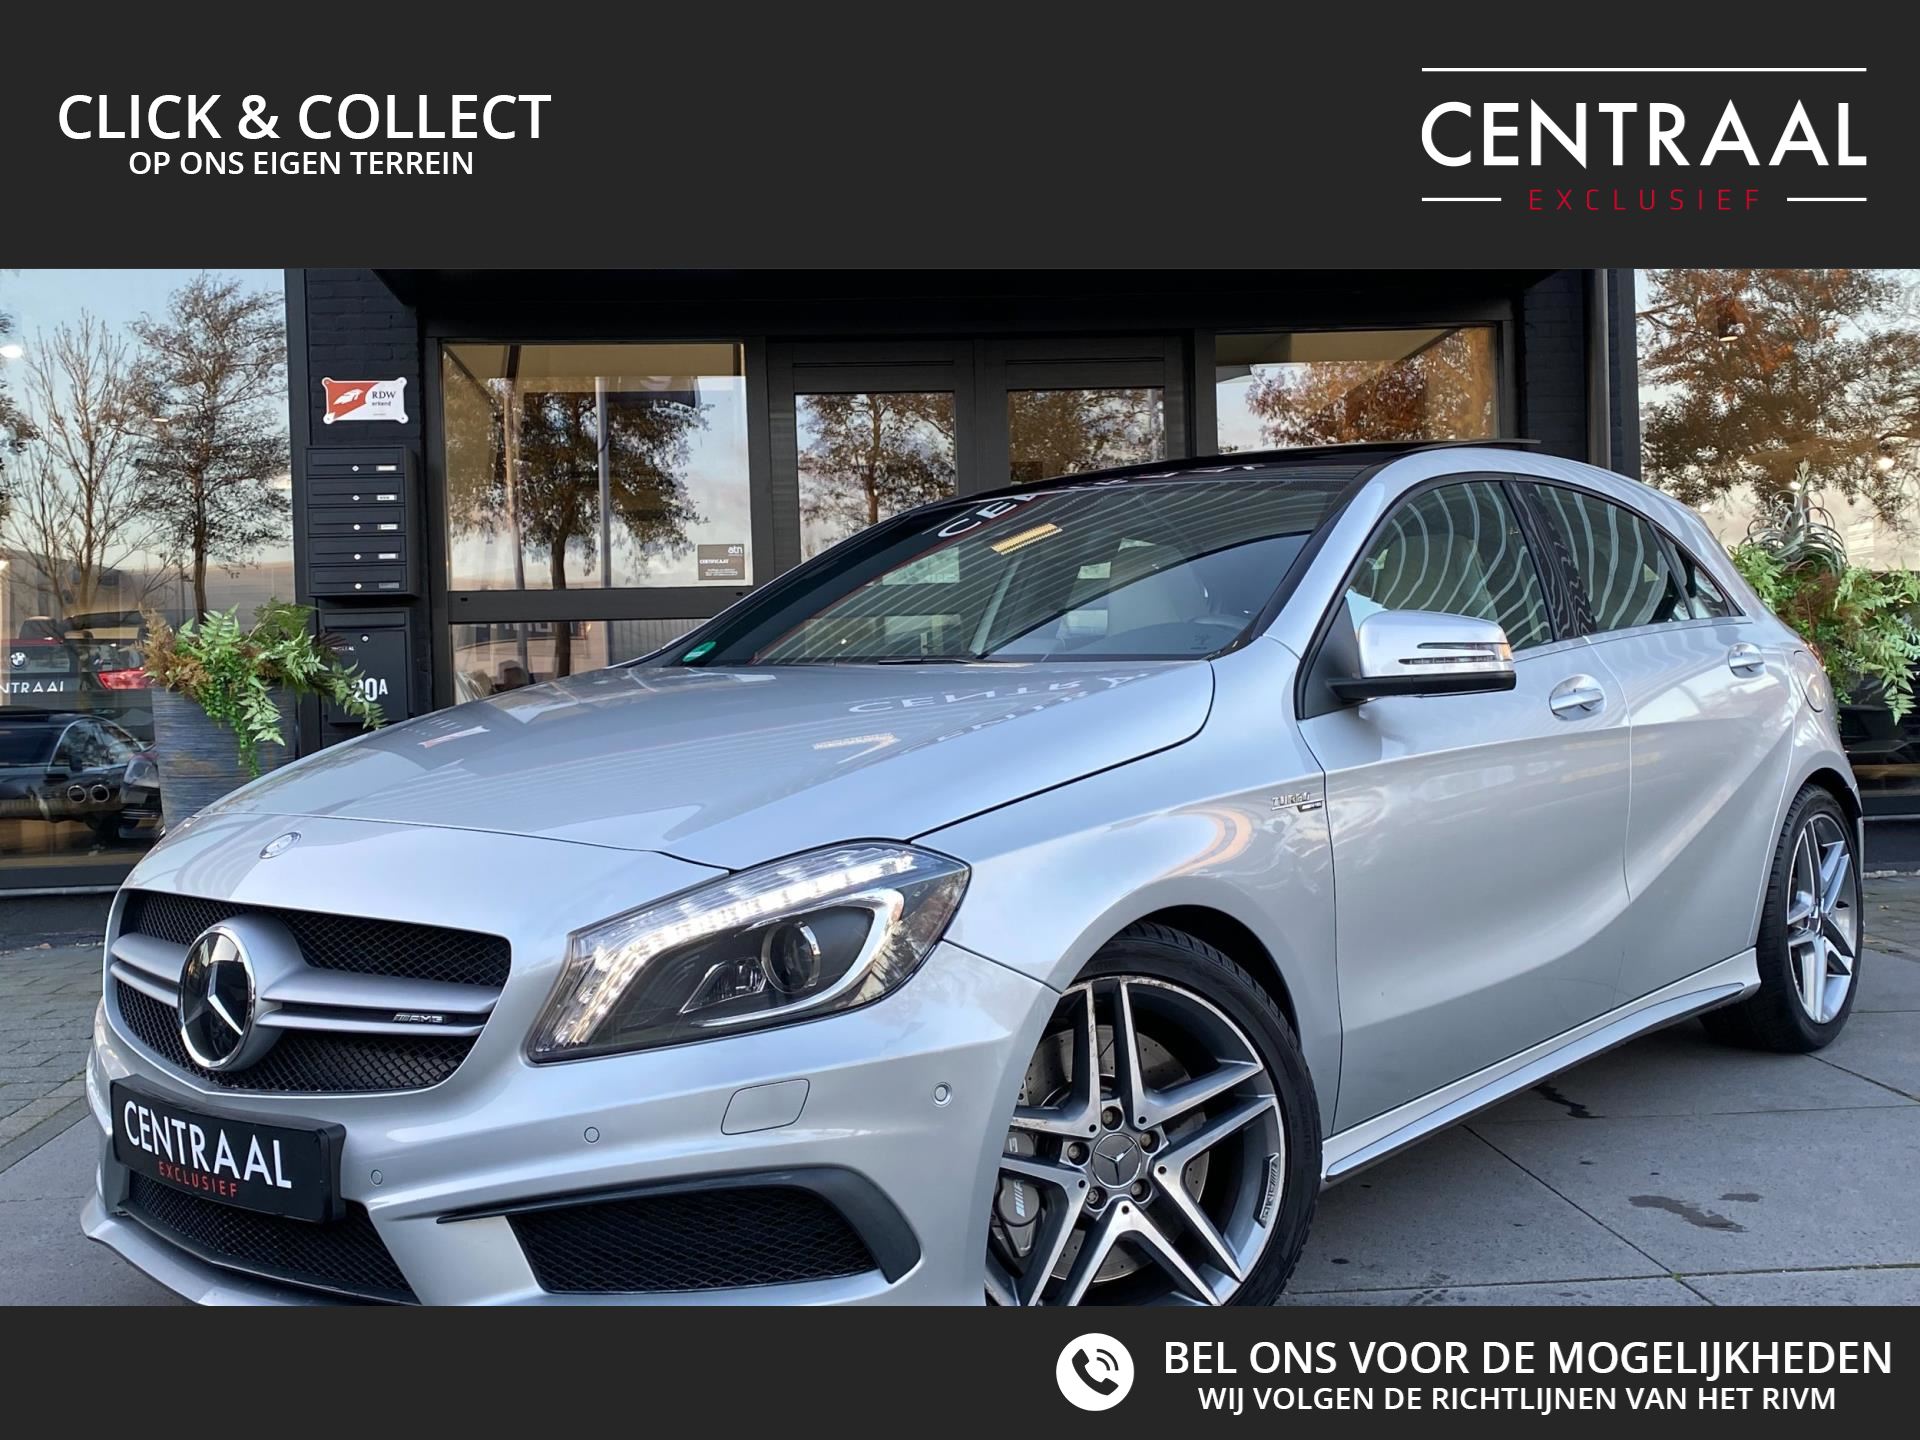 Mercedes-Benz A occasion - Centraal Exclusief B.V.